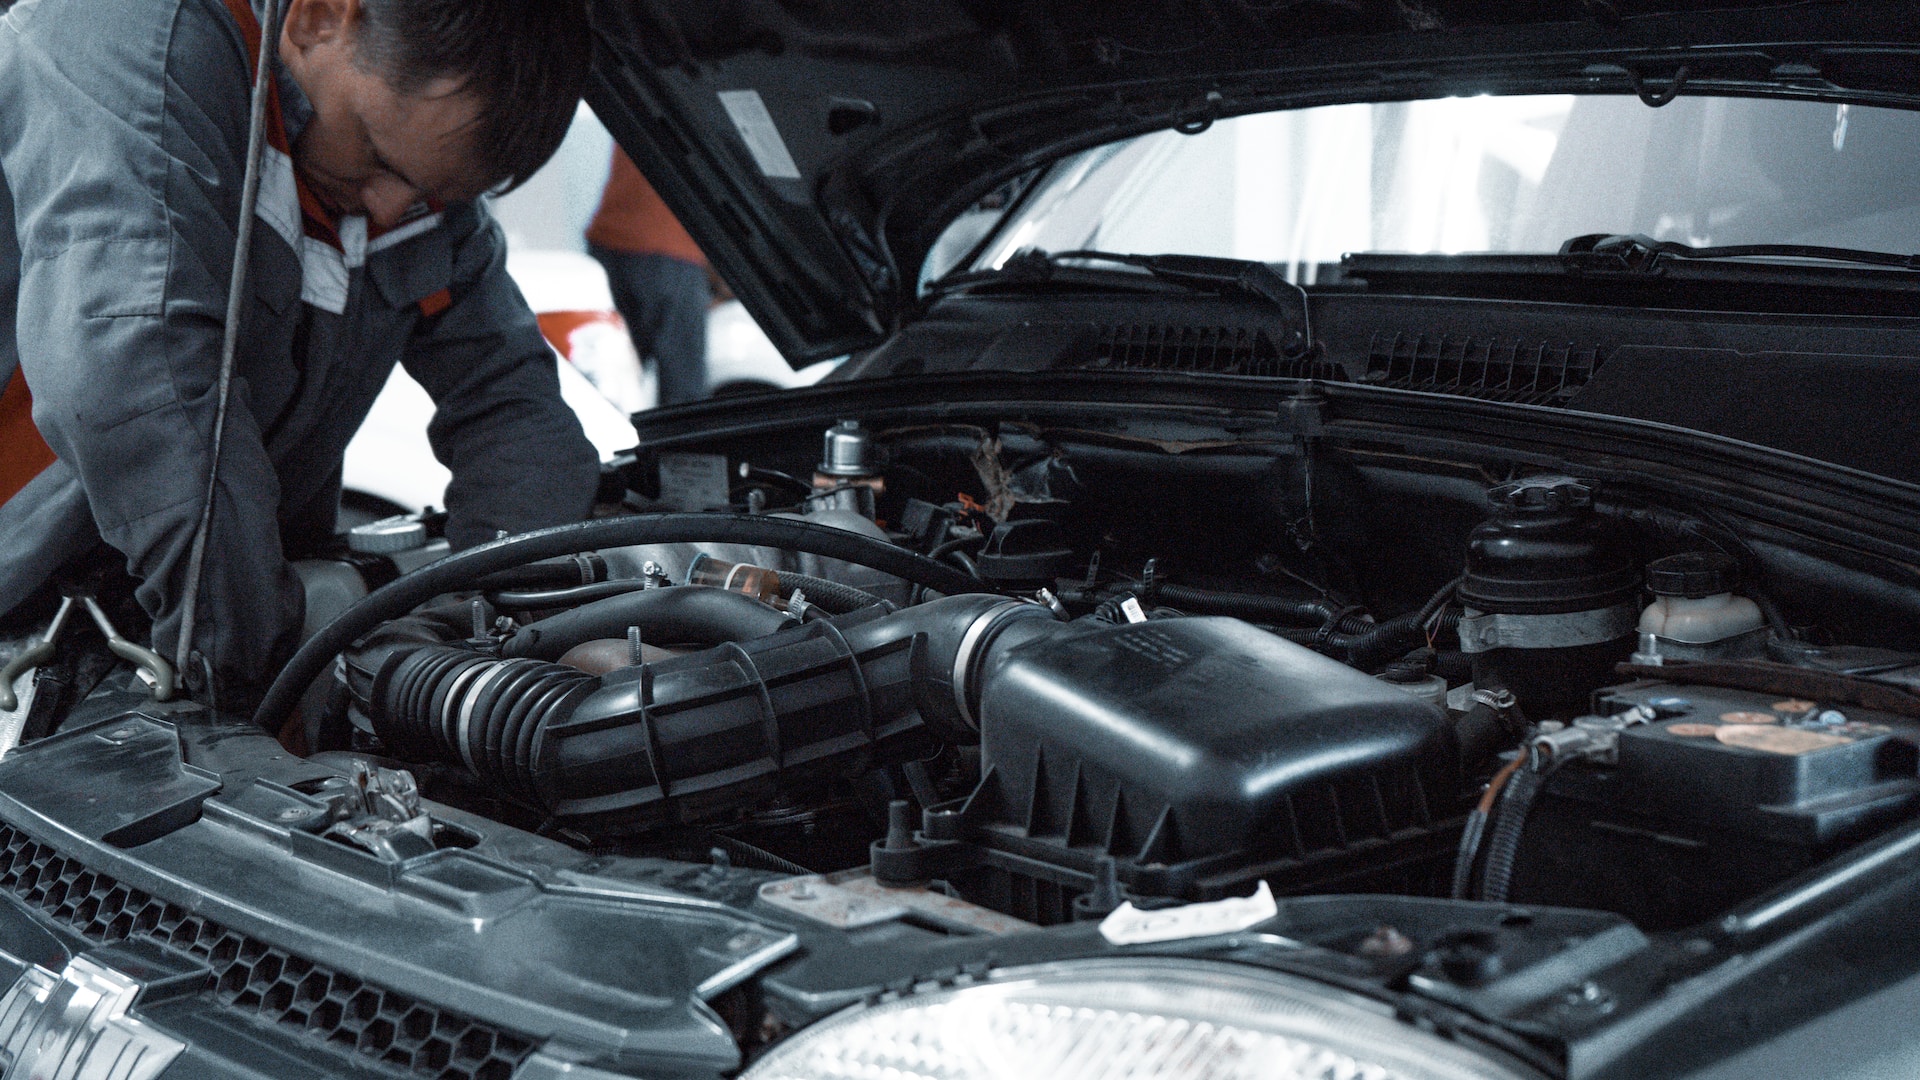 How to Properly Maintain Your Car: Top Tips for Longevity